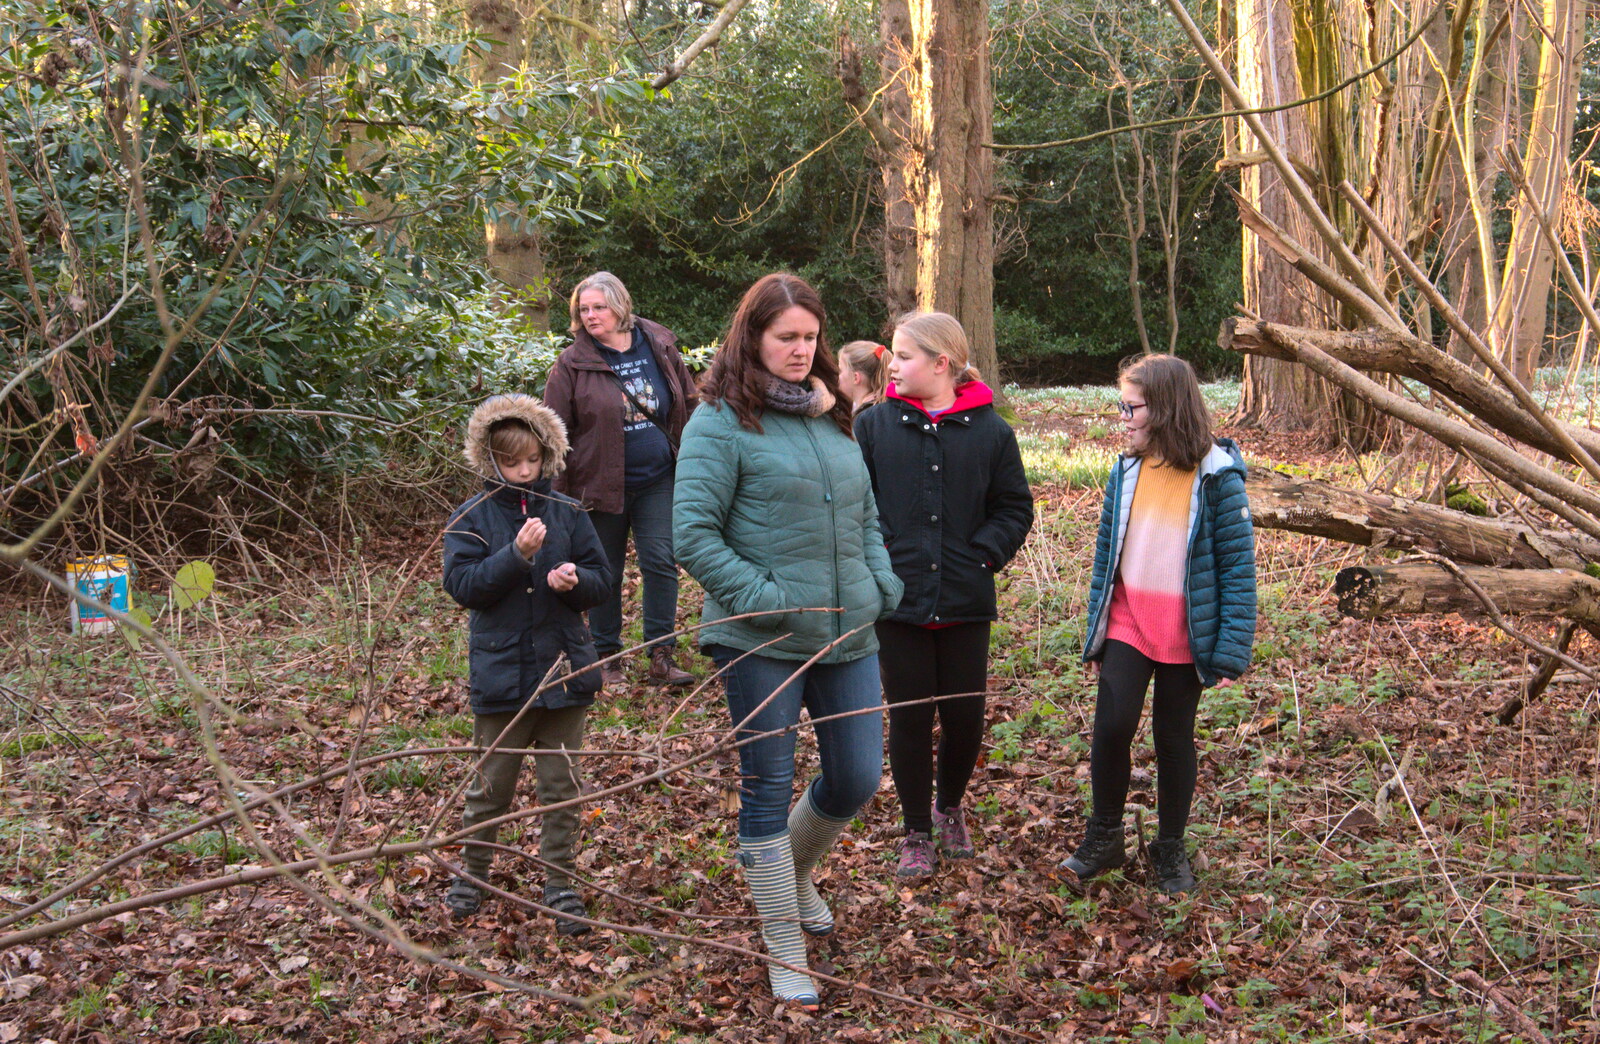 The gang in the woods from Snowdrops at Talconeston Hall, Tacolneston, Norfolk - 7th February 2020